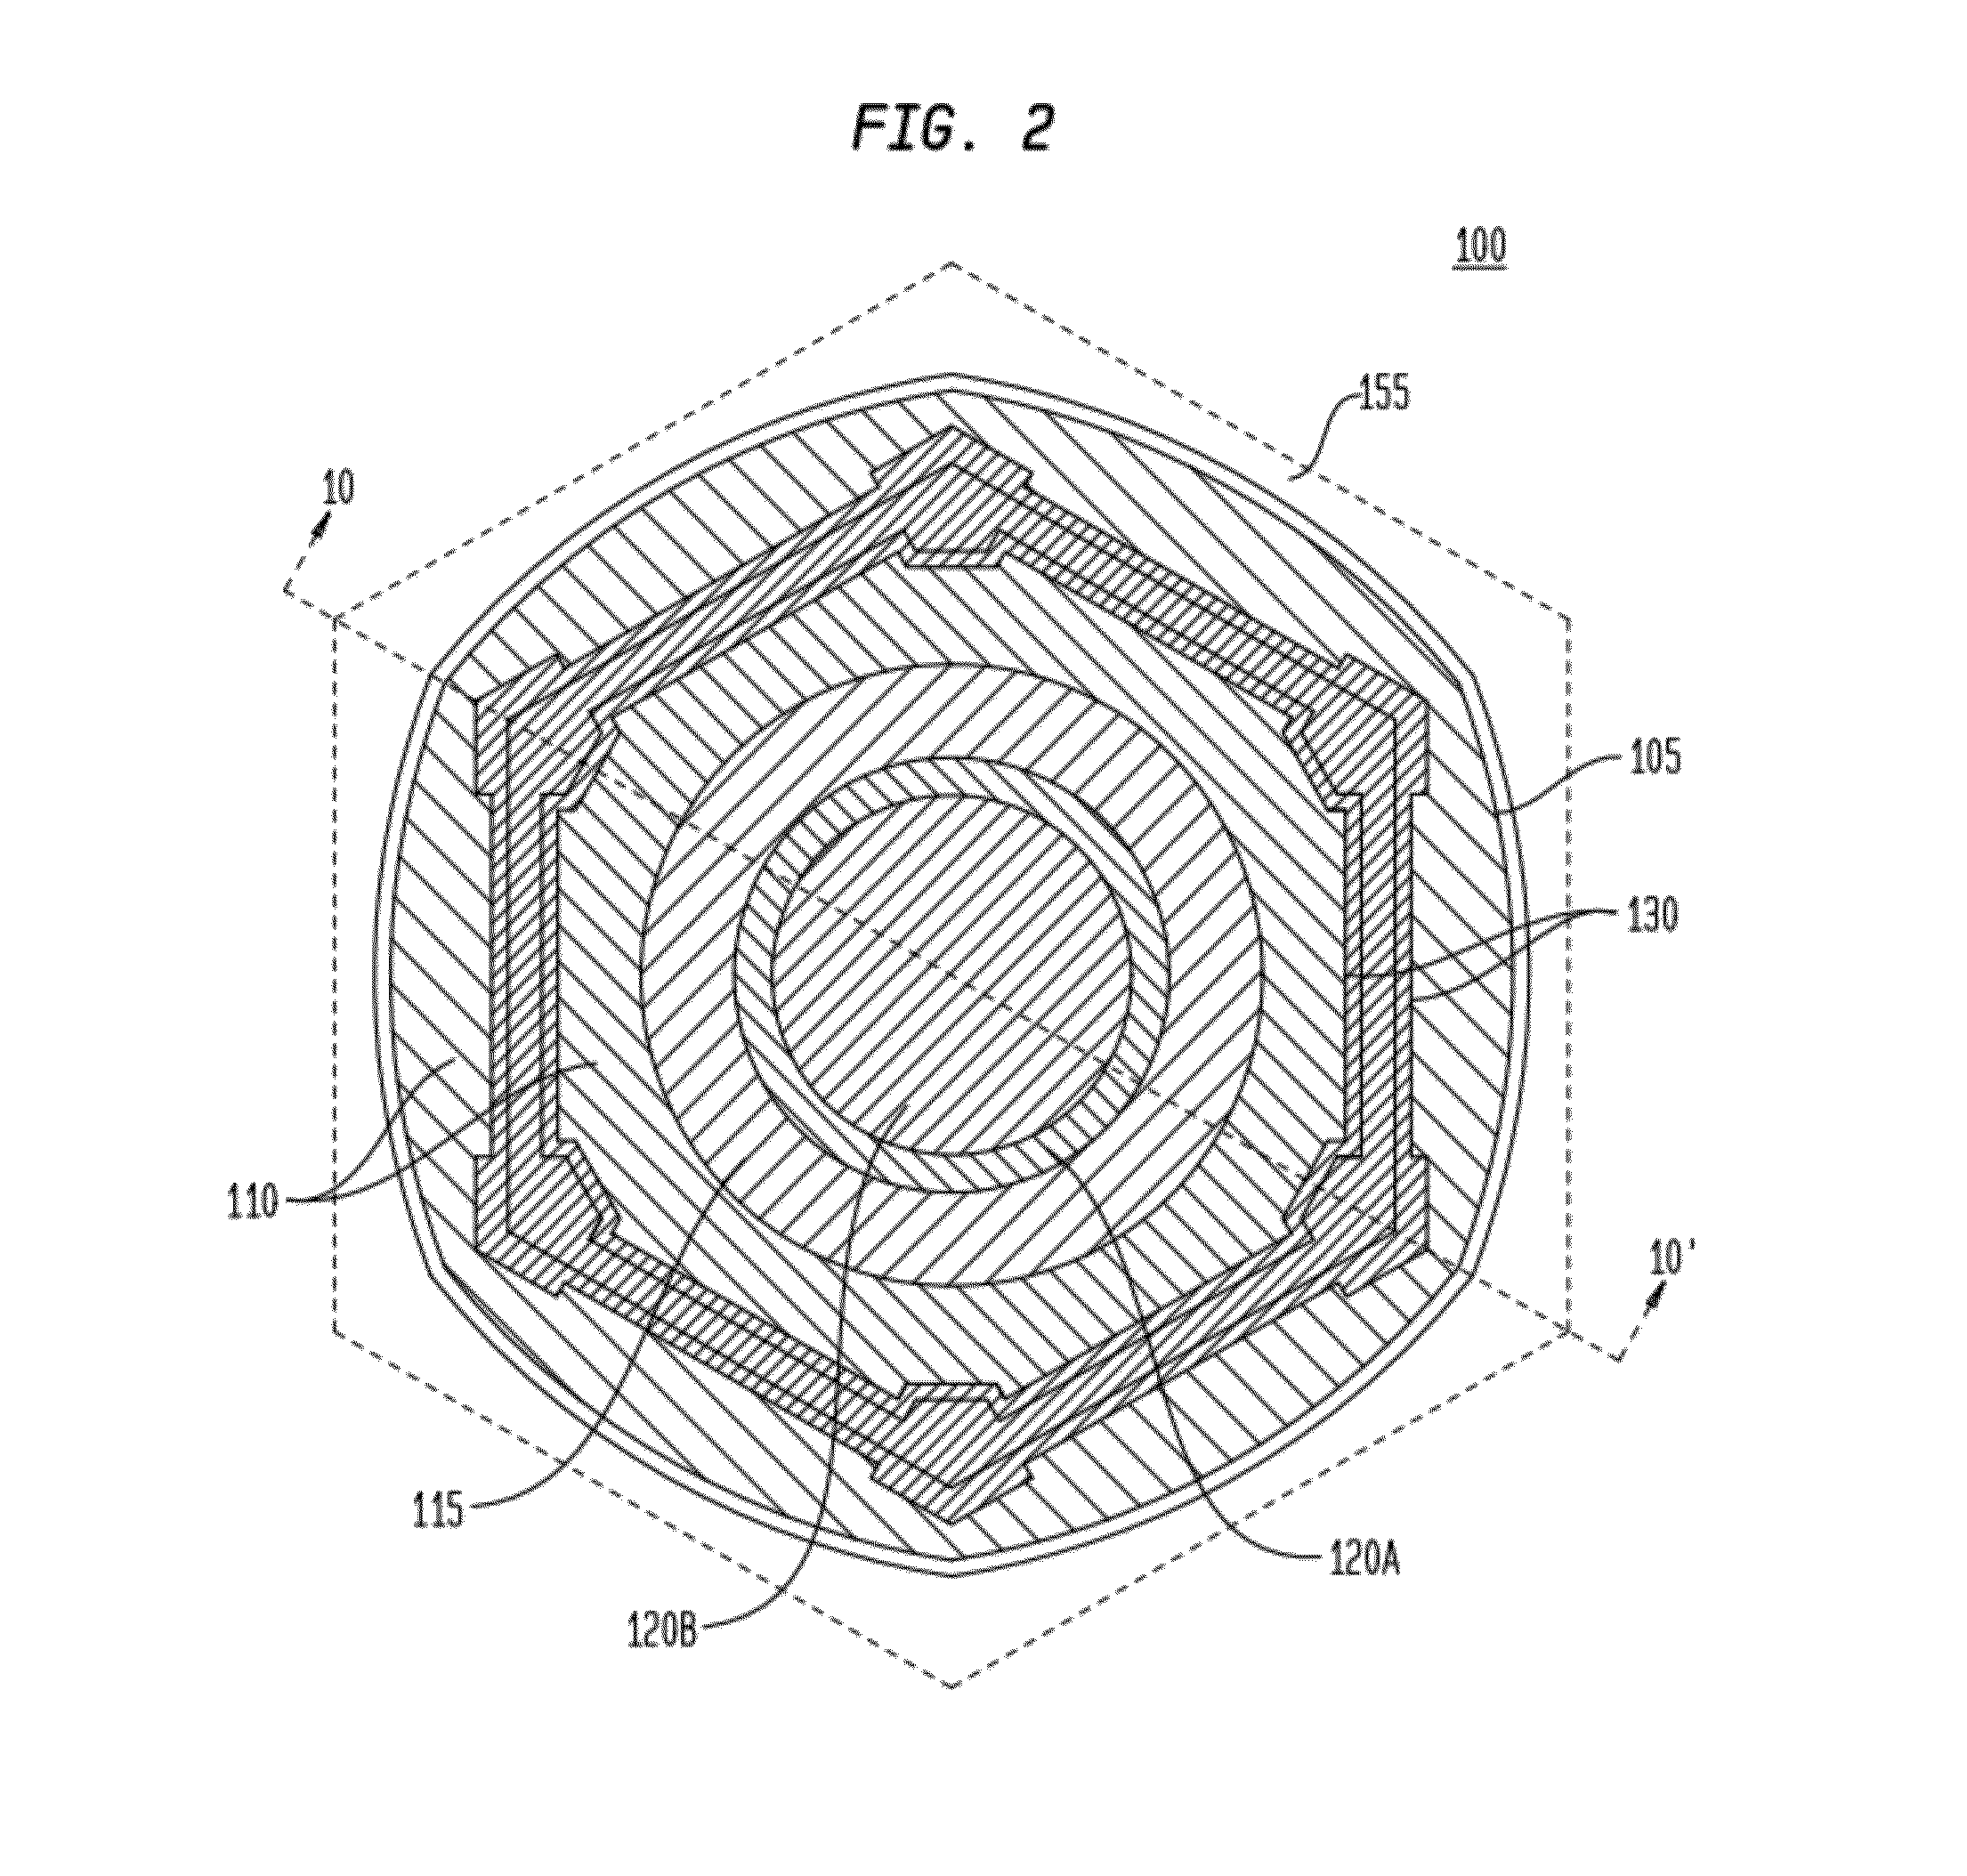 Method of Manufacturing a Printable Composition of a Liquid or Gel Suspension of Diodes